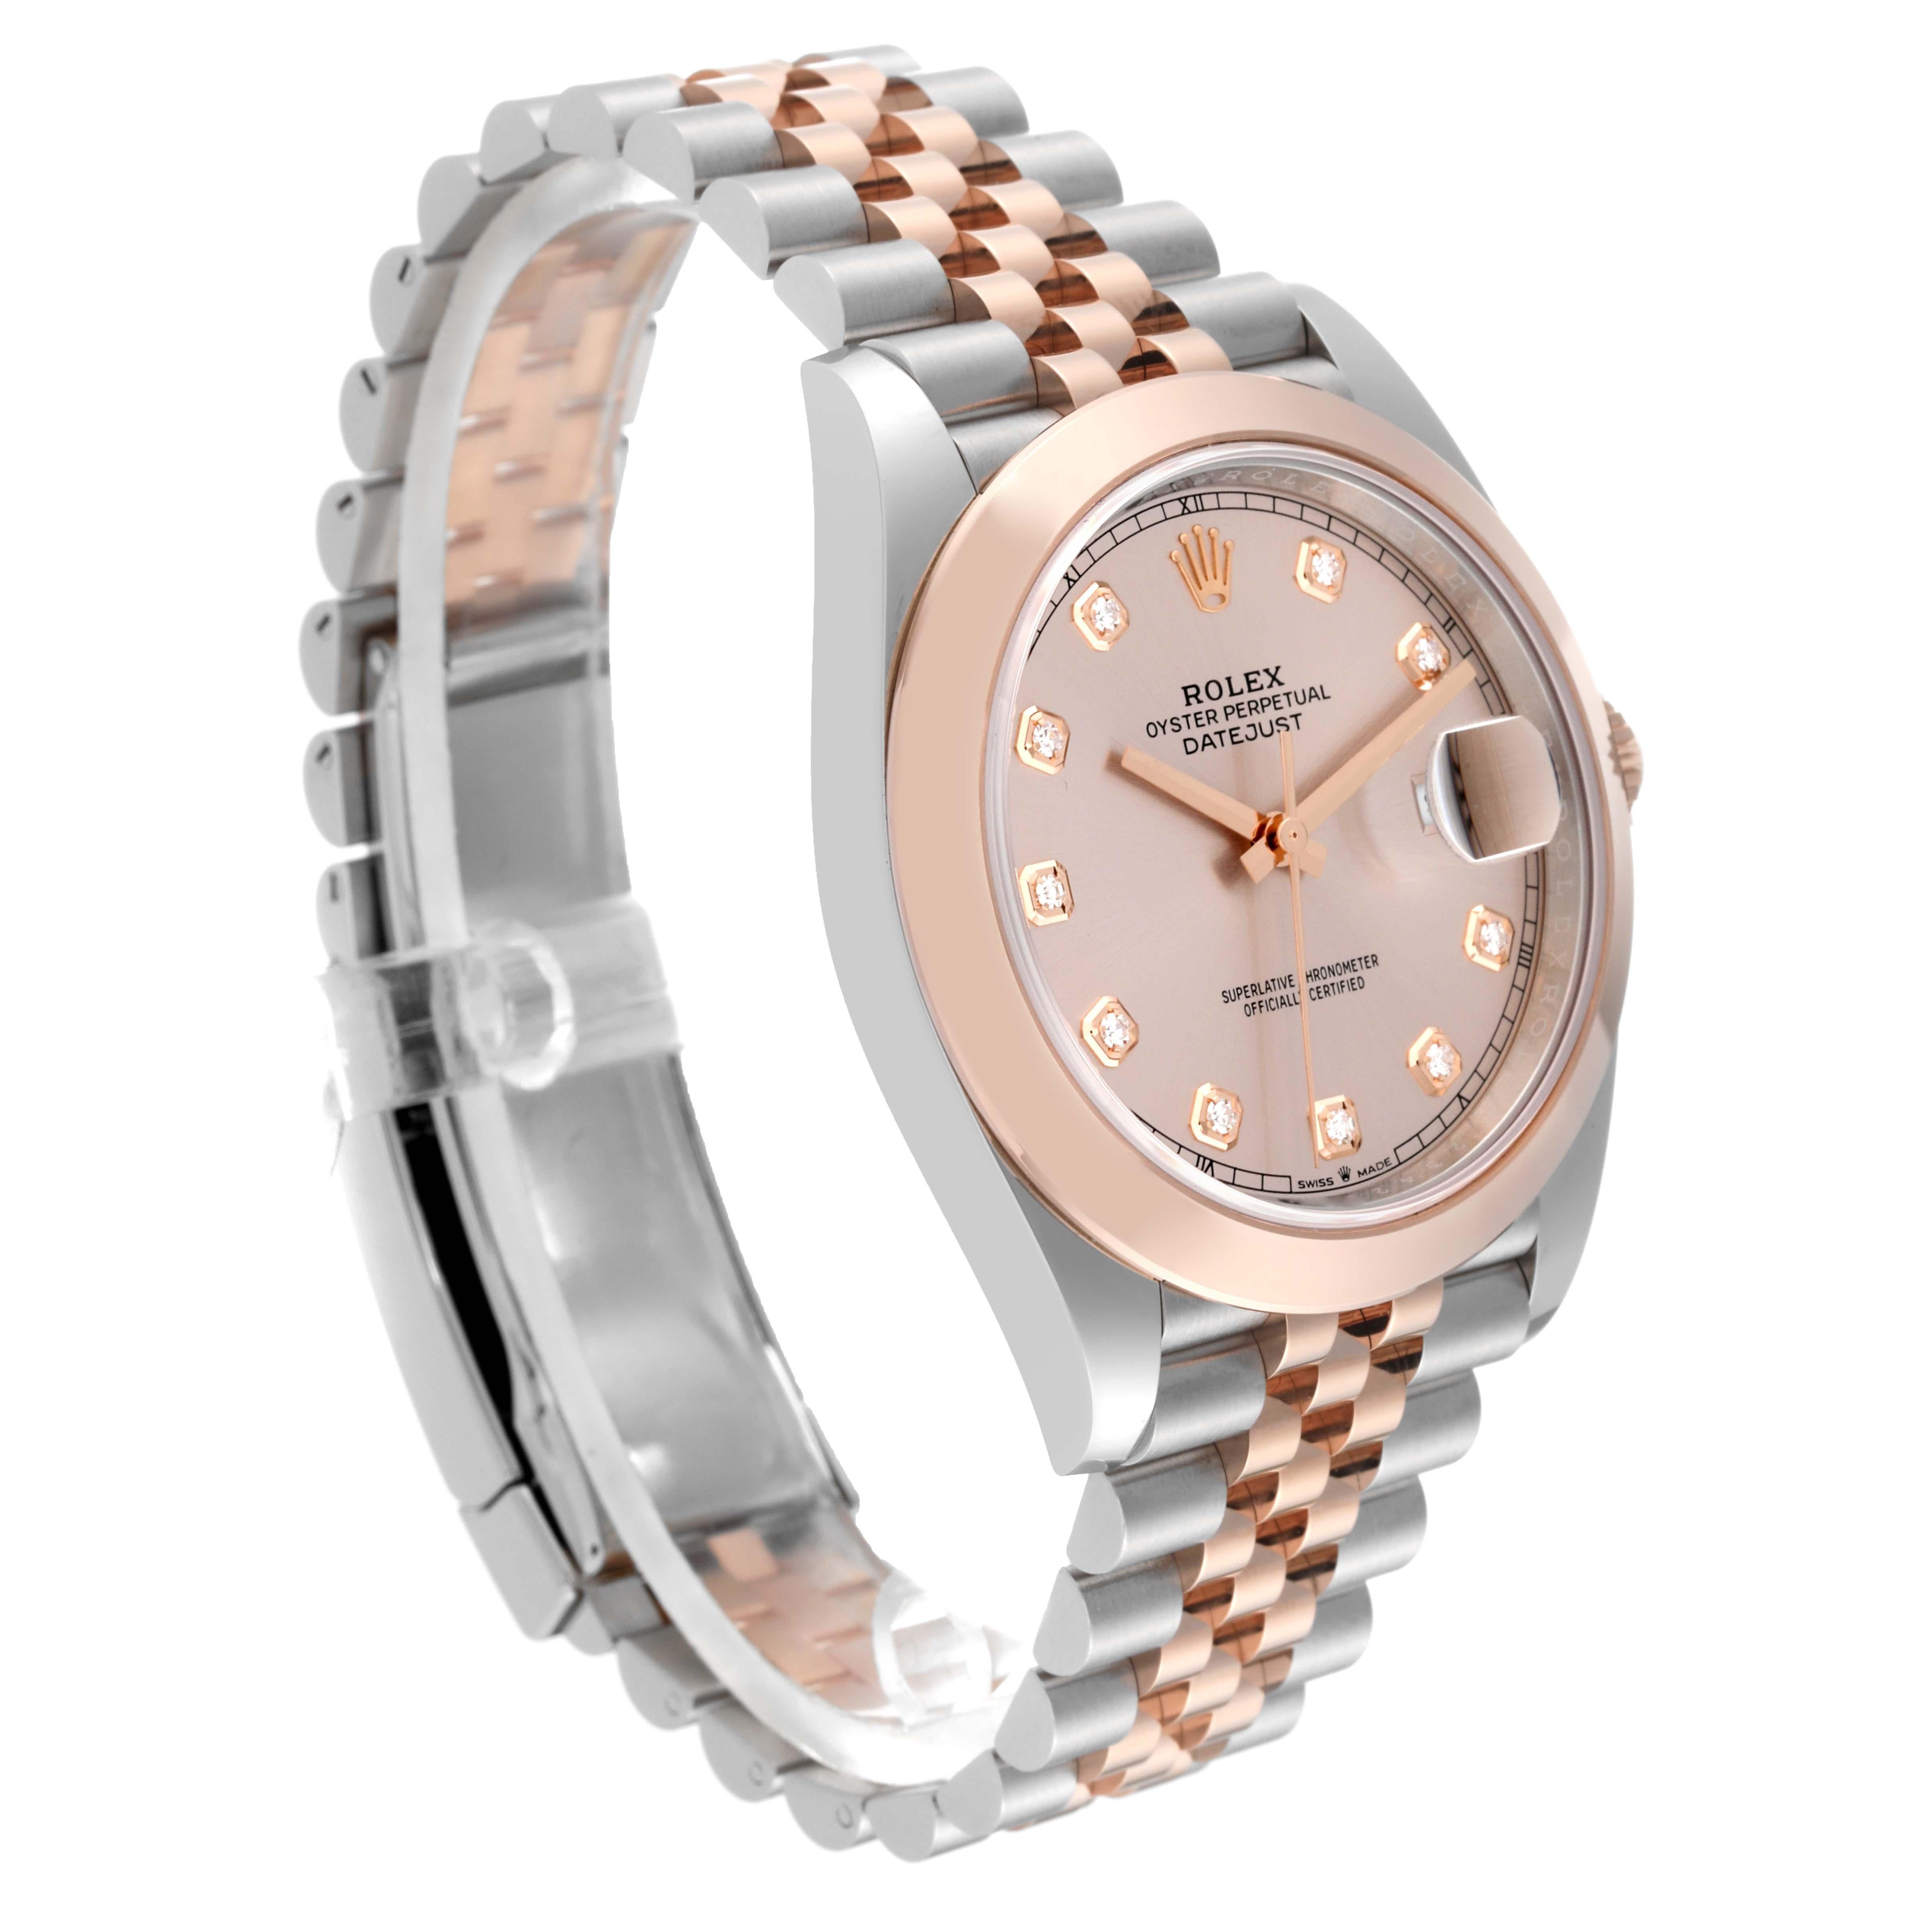 Rolex Datejust 41 Steel Rose Gold Diamond Dial Mens Watch 126301 Box Card For Sale 6